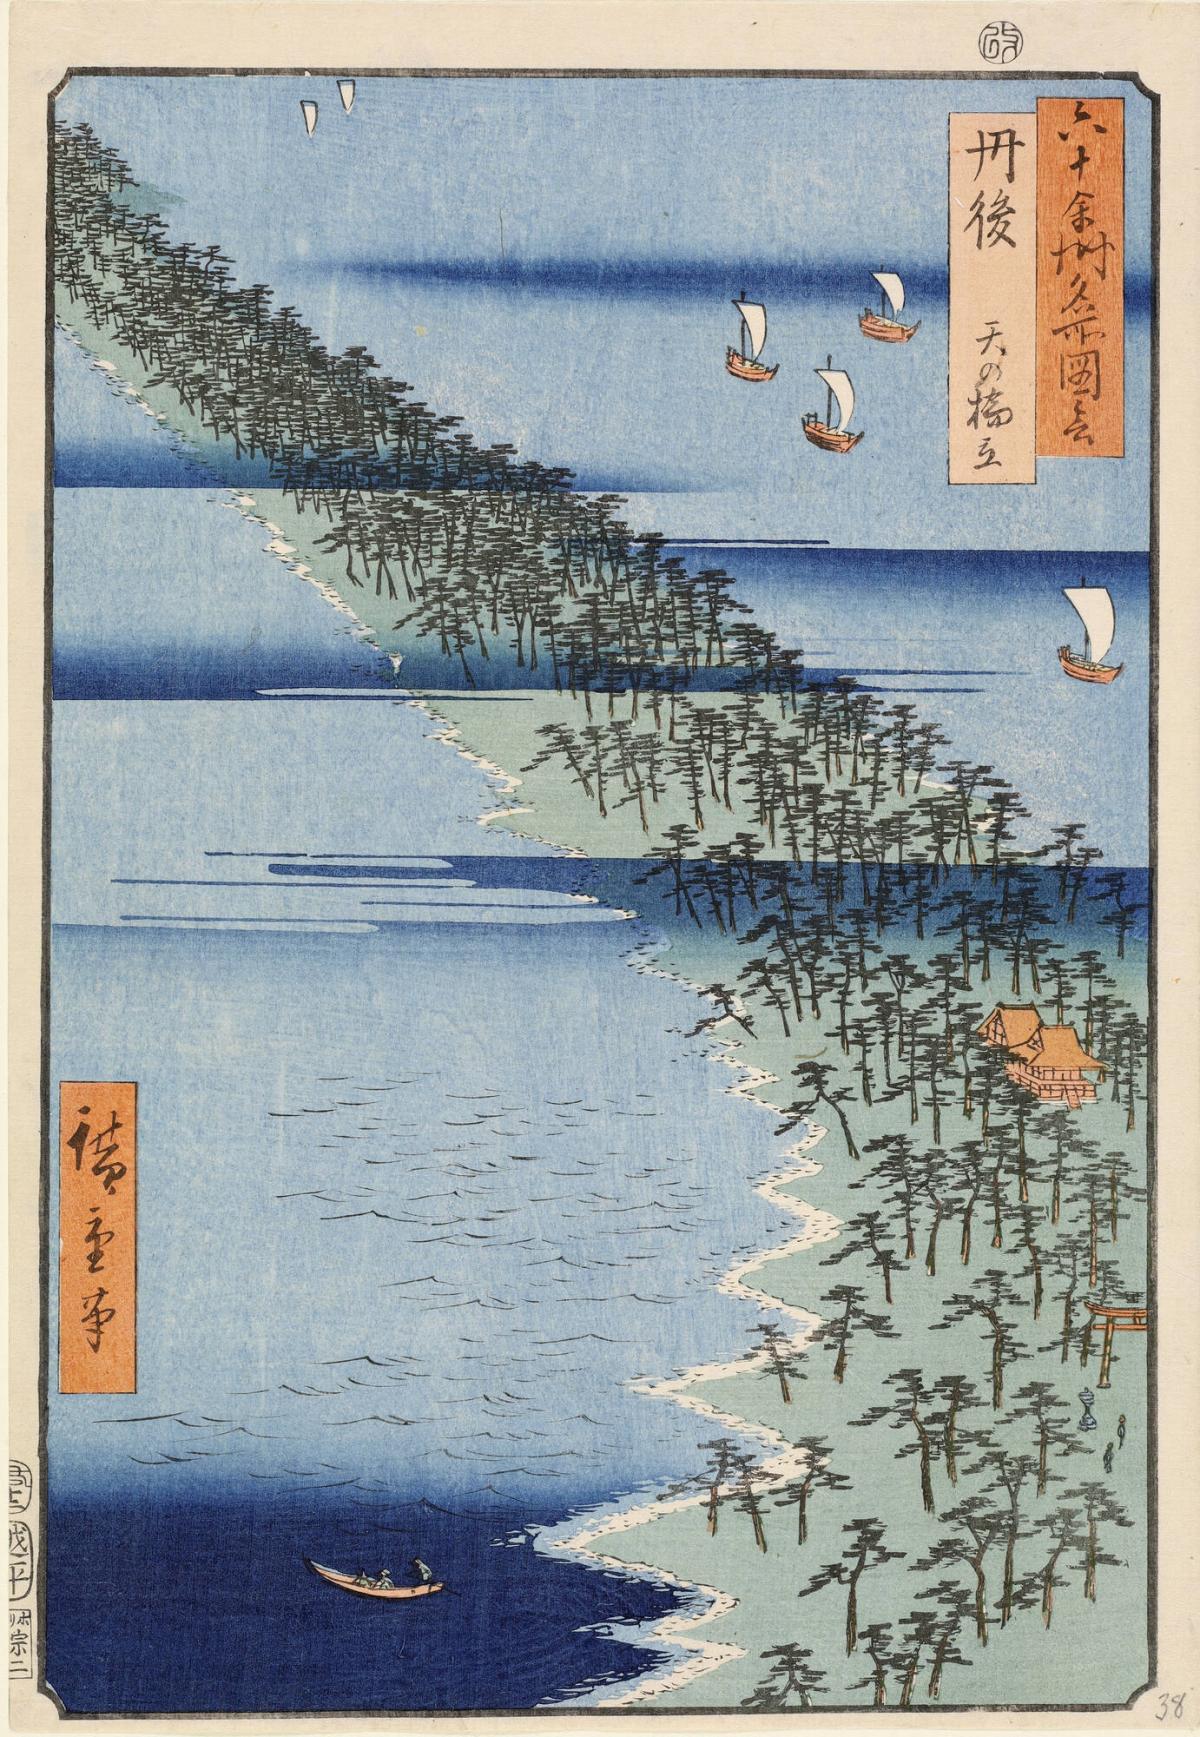 Amanohashidate Peninsula in Tango Province, no. 38 from the series Pictures of Famous Places in the Sixty-odd Provinces